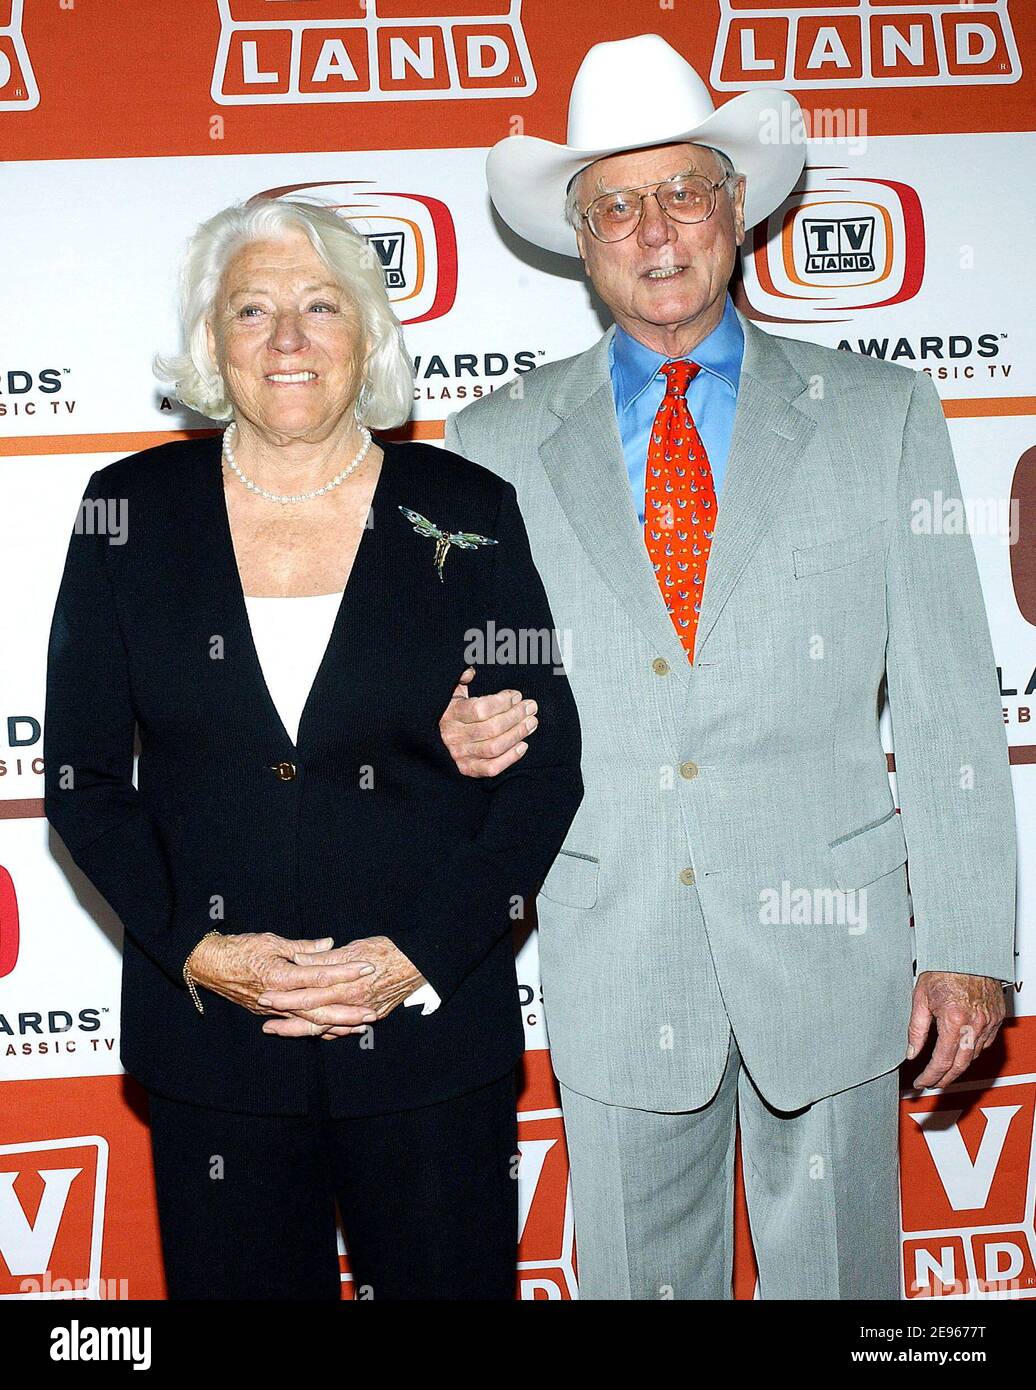 Larry Hagman and his wife Maj Axelsson attend the 2006 TV Land Awards held at the Barker Hangar in Santa Monica, CA, USA on March 19, 2006. Photo by Lionel Hahn/ABACAPRESS.COM Stock Photo